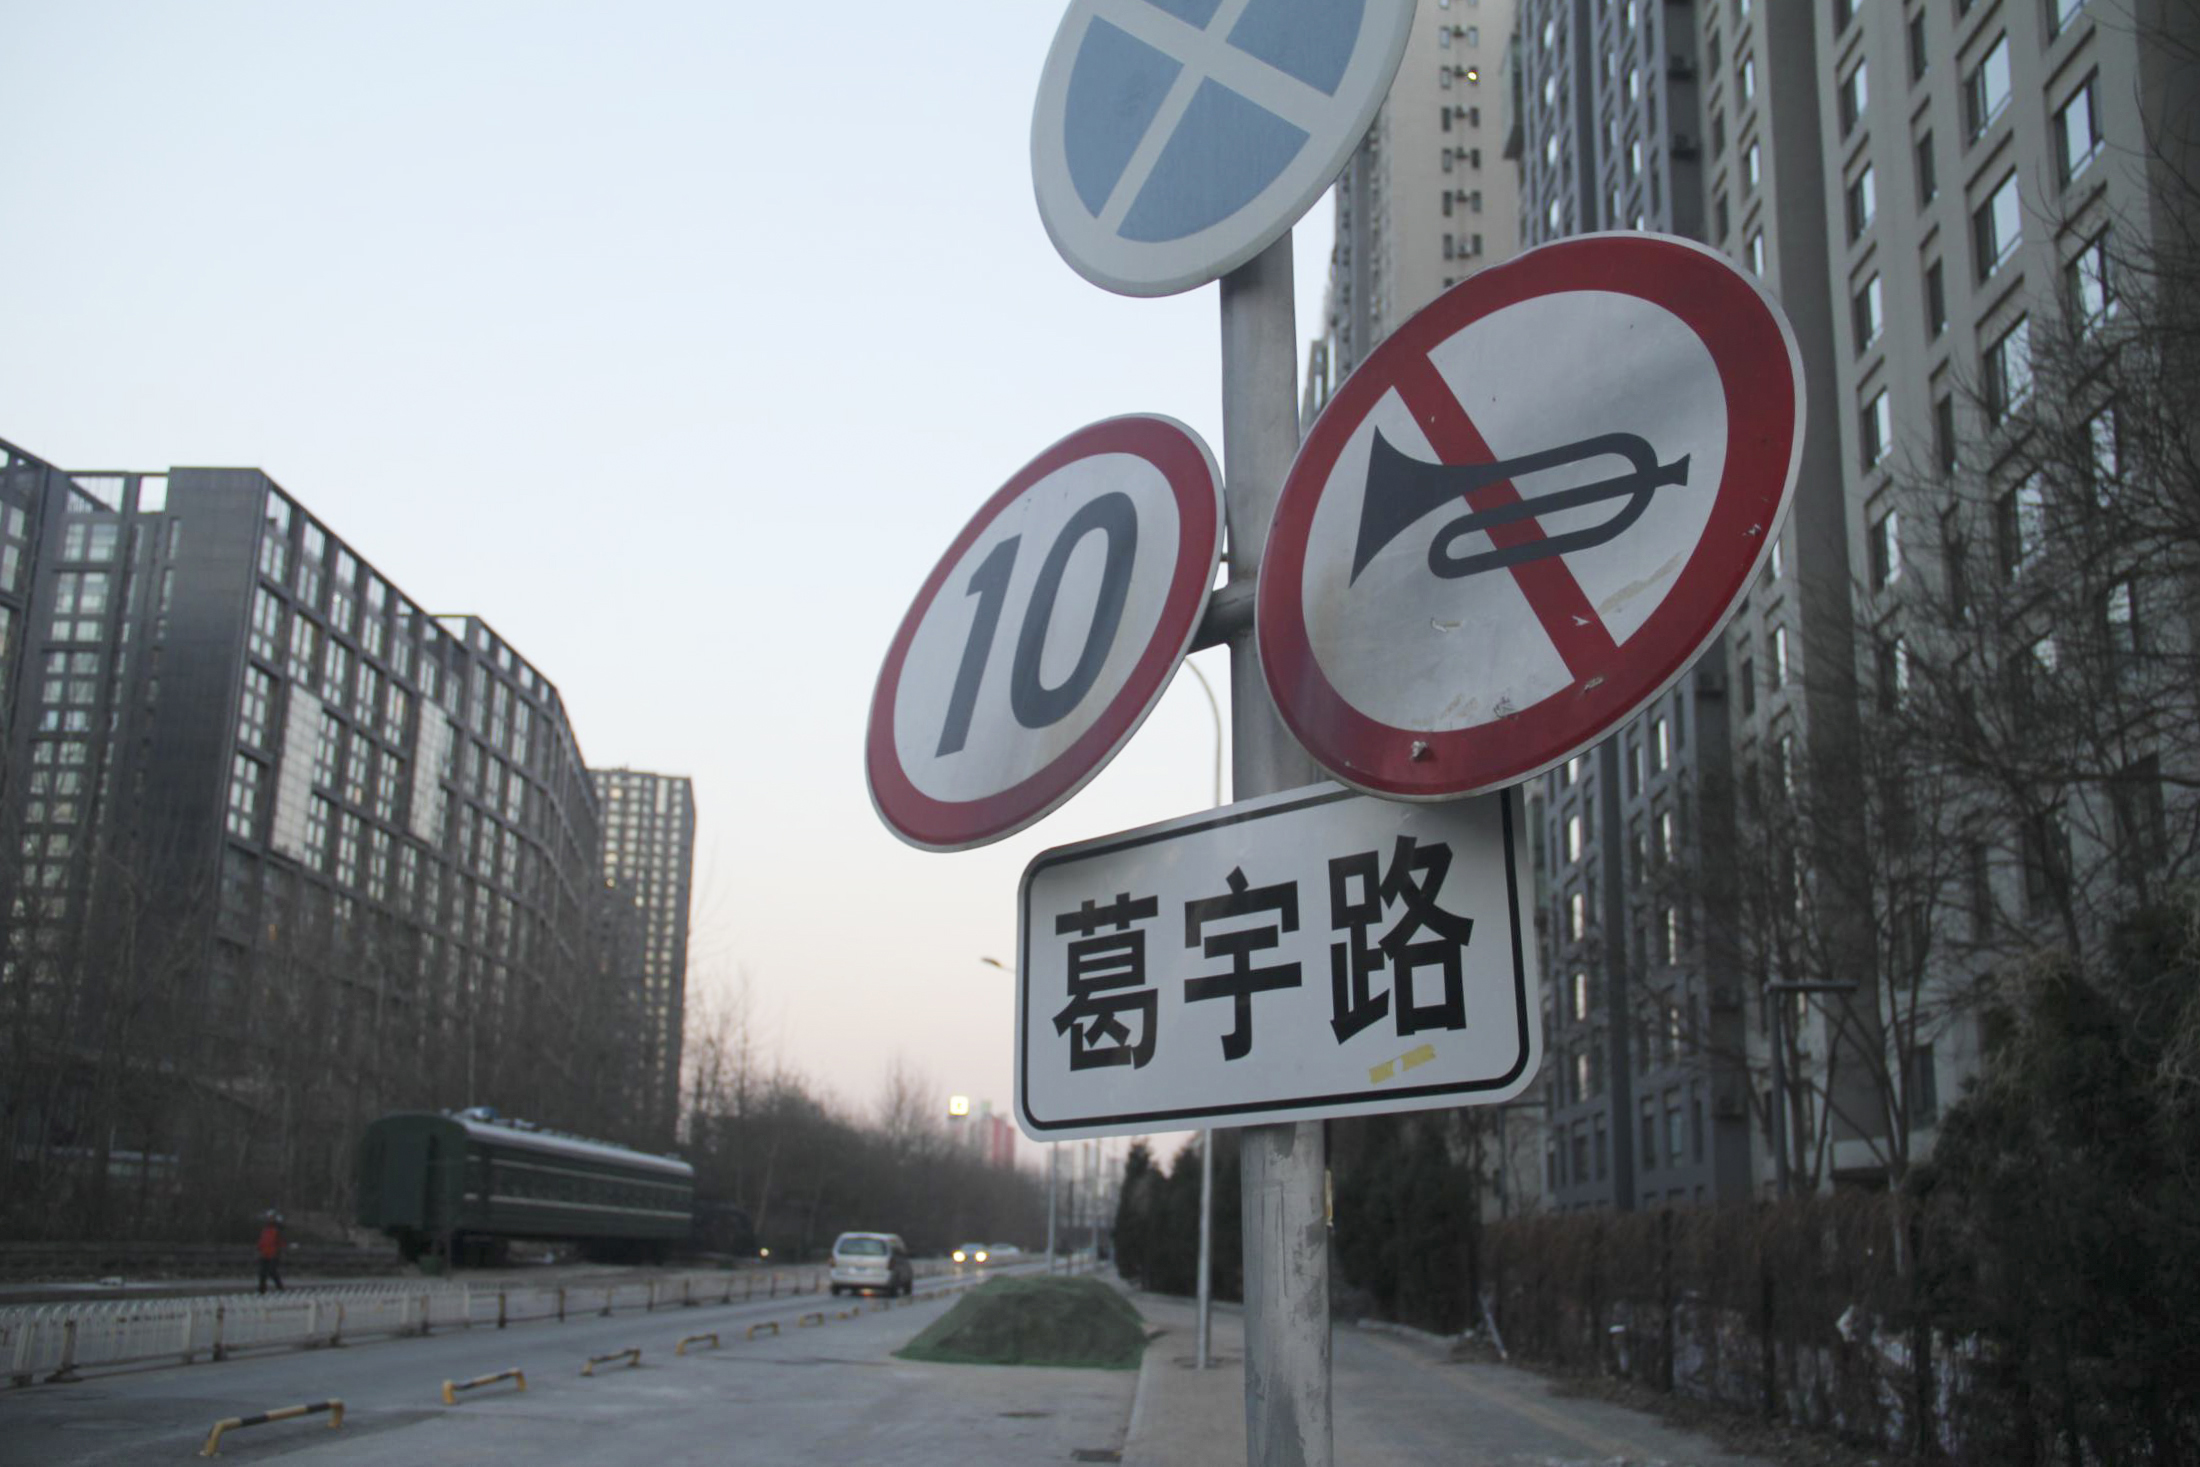 A road sign created by the artist, Ge Yulu, to trick authorities and power structures into naming a road after him